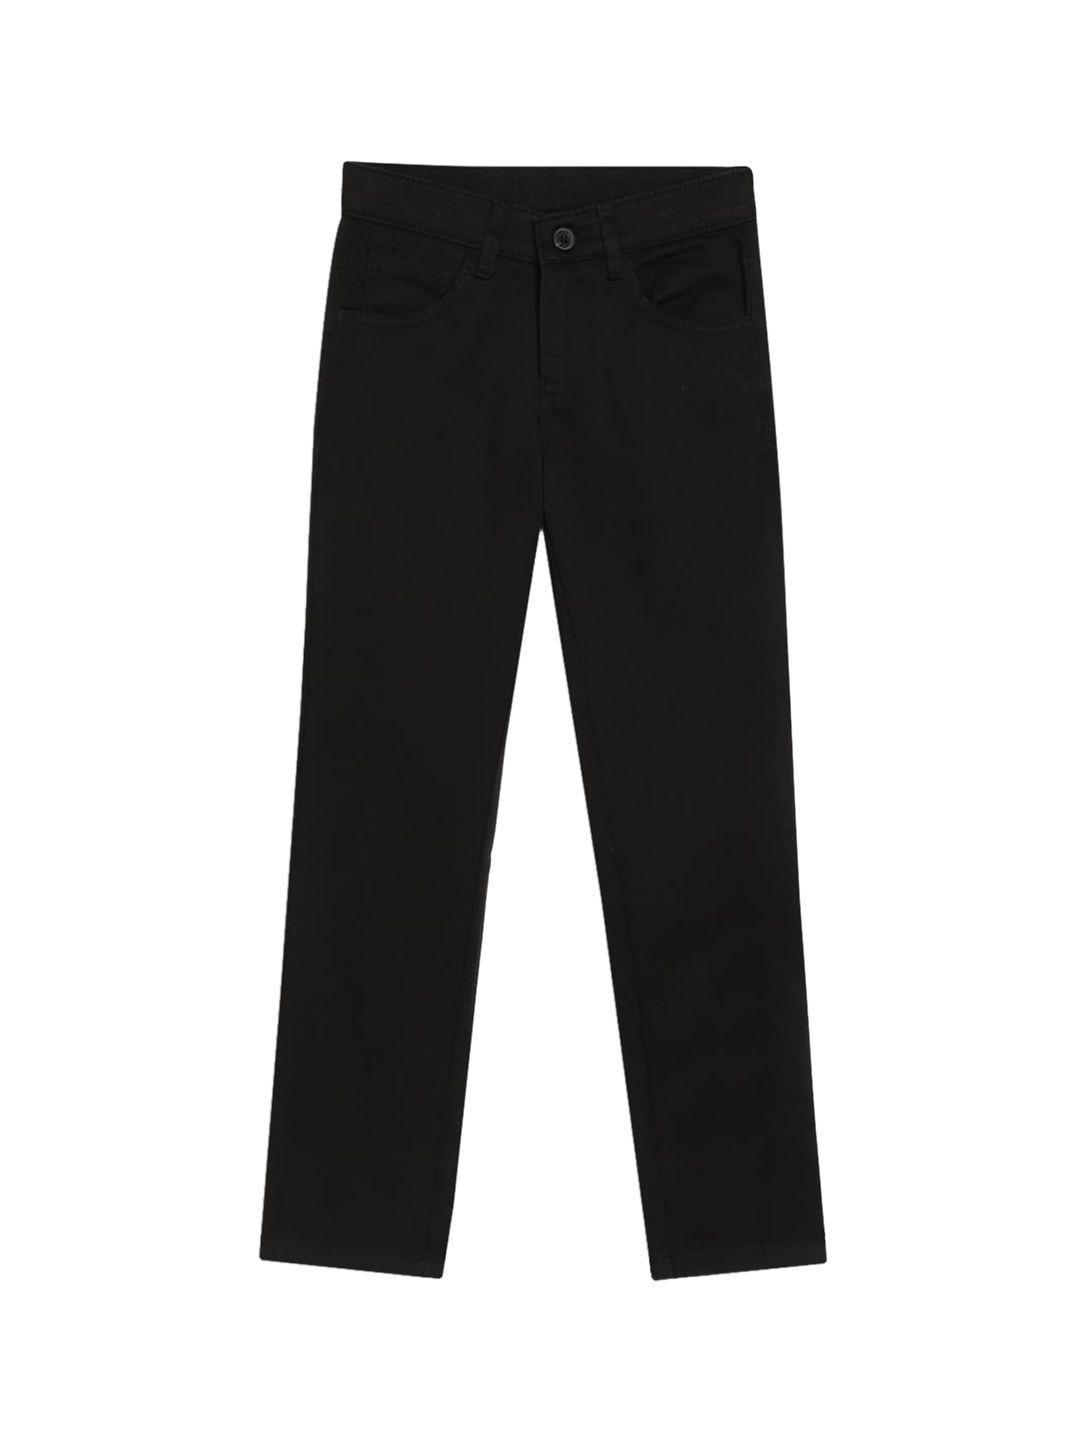 Cantabil Boys Black Chinos Trousers